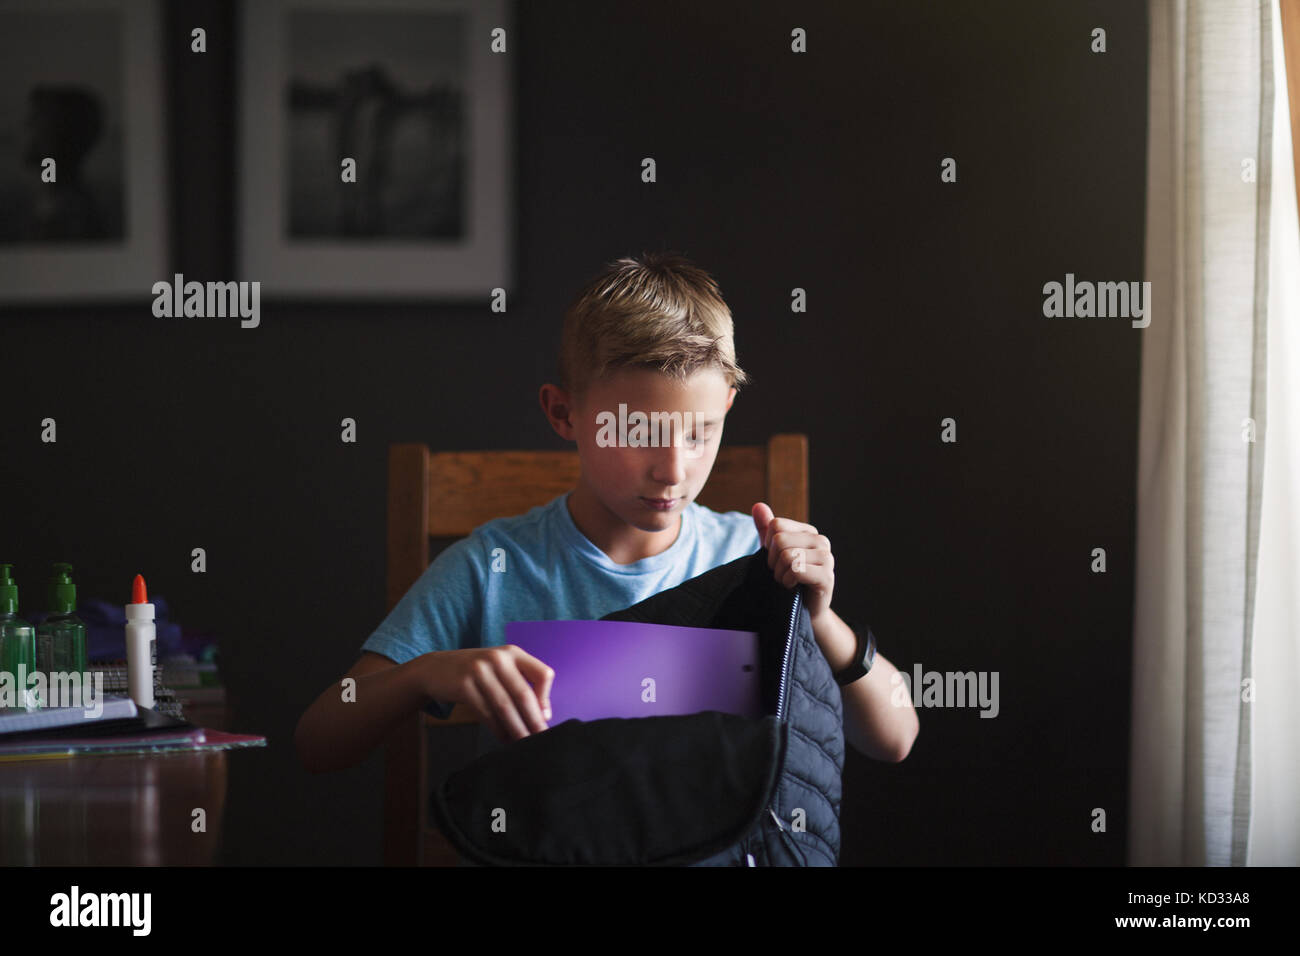 Boy packing backpack with school stationery supplies Stock Photo